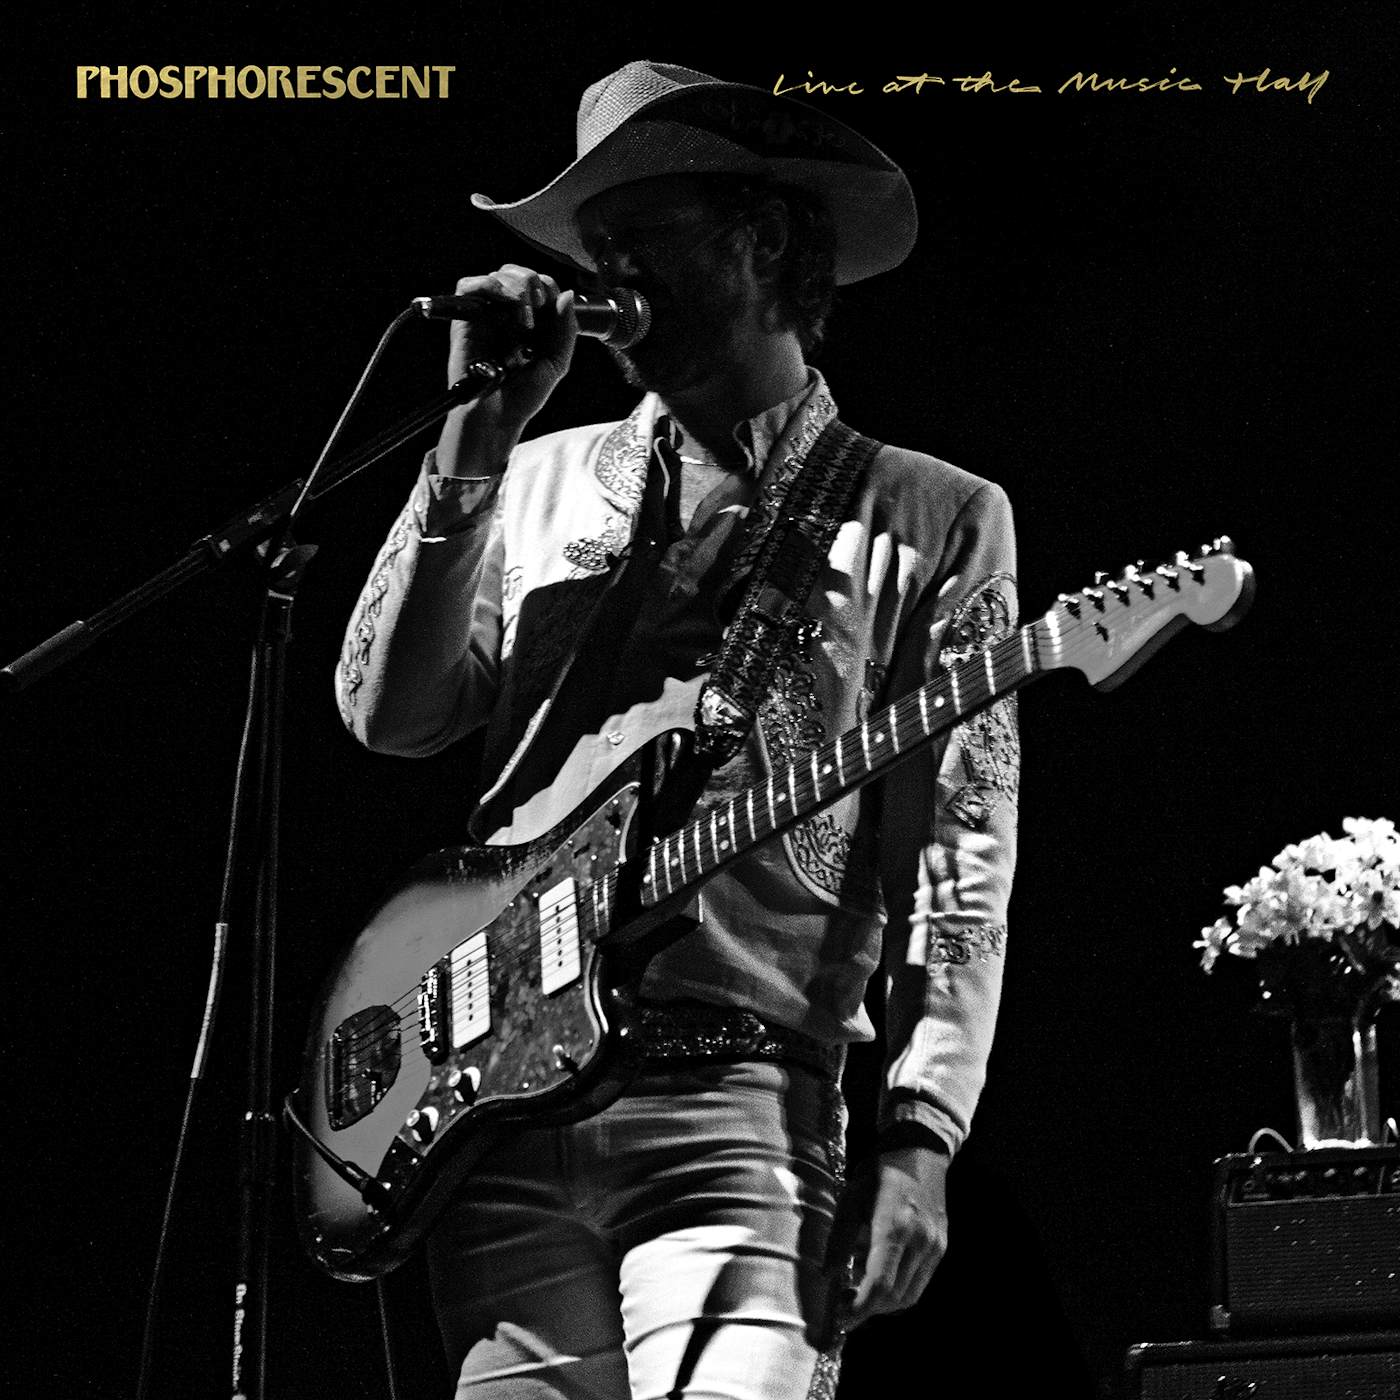 Phosphorescent LIVE AT THE MUSIC HALL CD